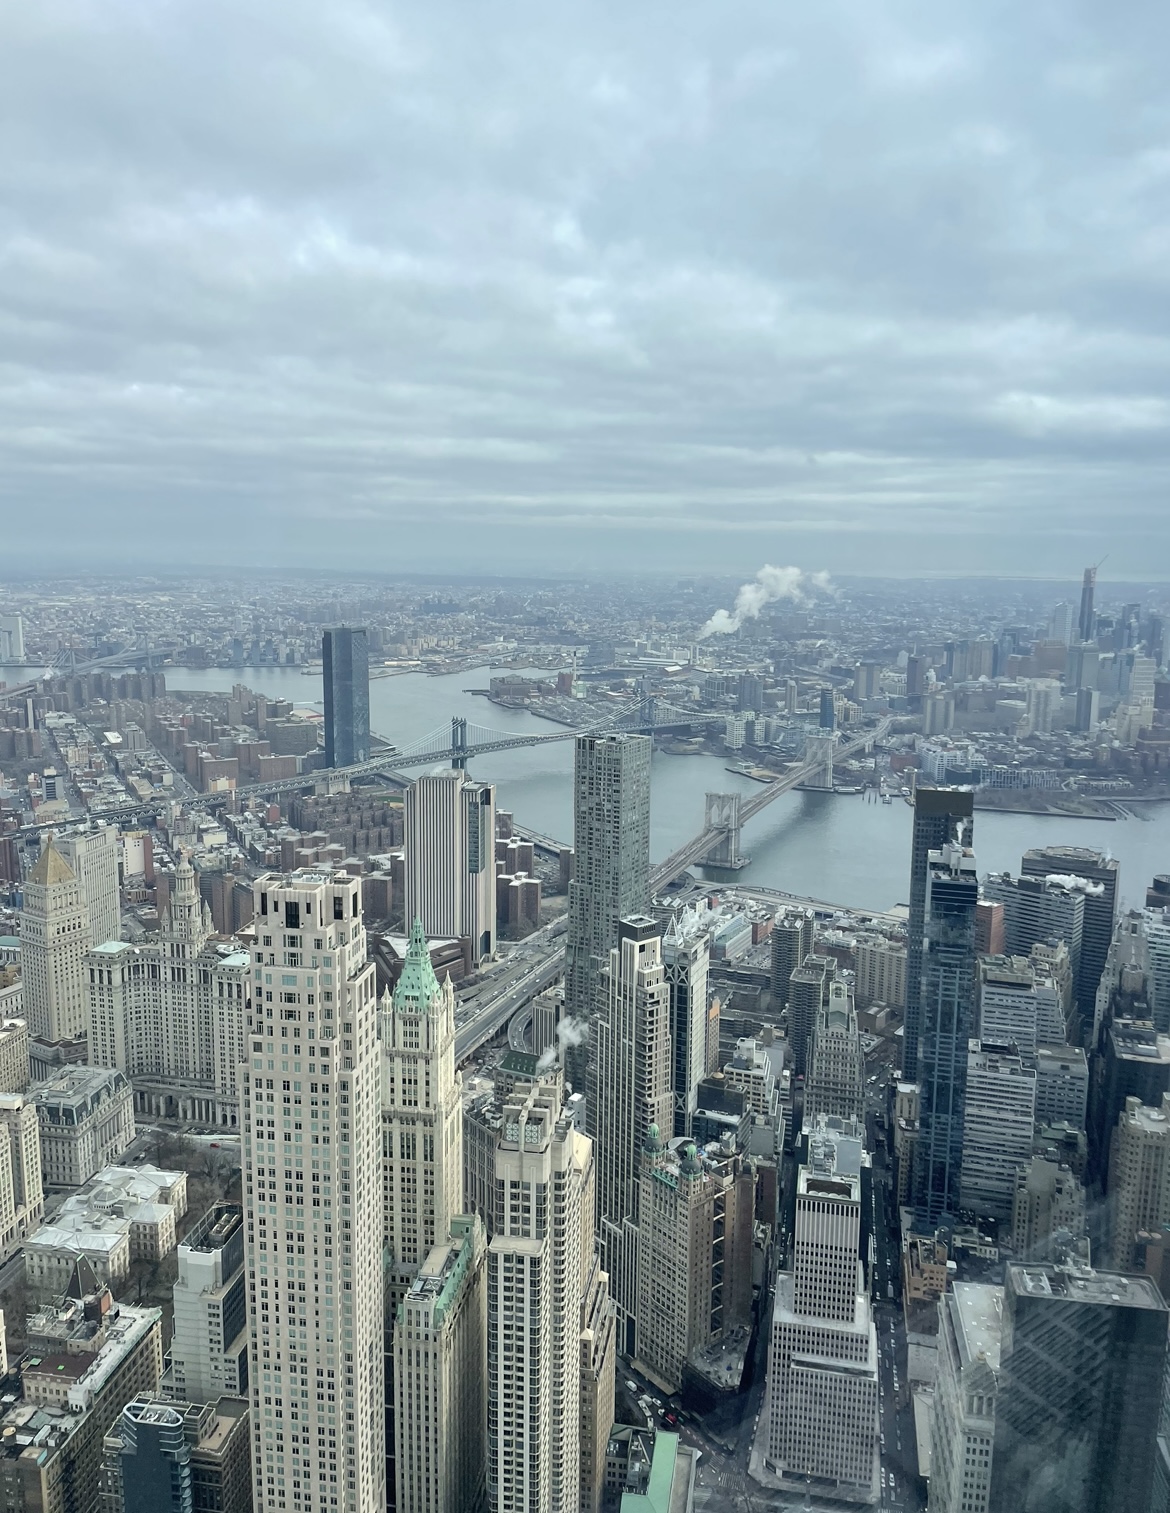  View of New York City from the 102 floor of the Prudential Tower. The sky is cloudy and the brooklyn bridge is in the frame.